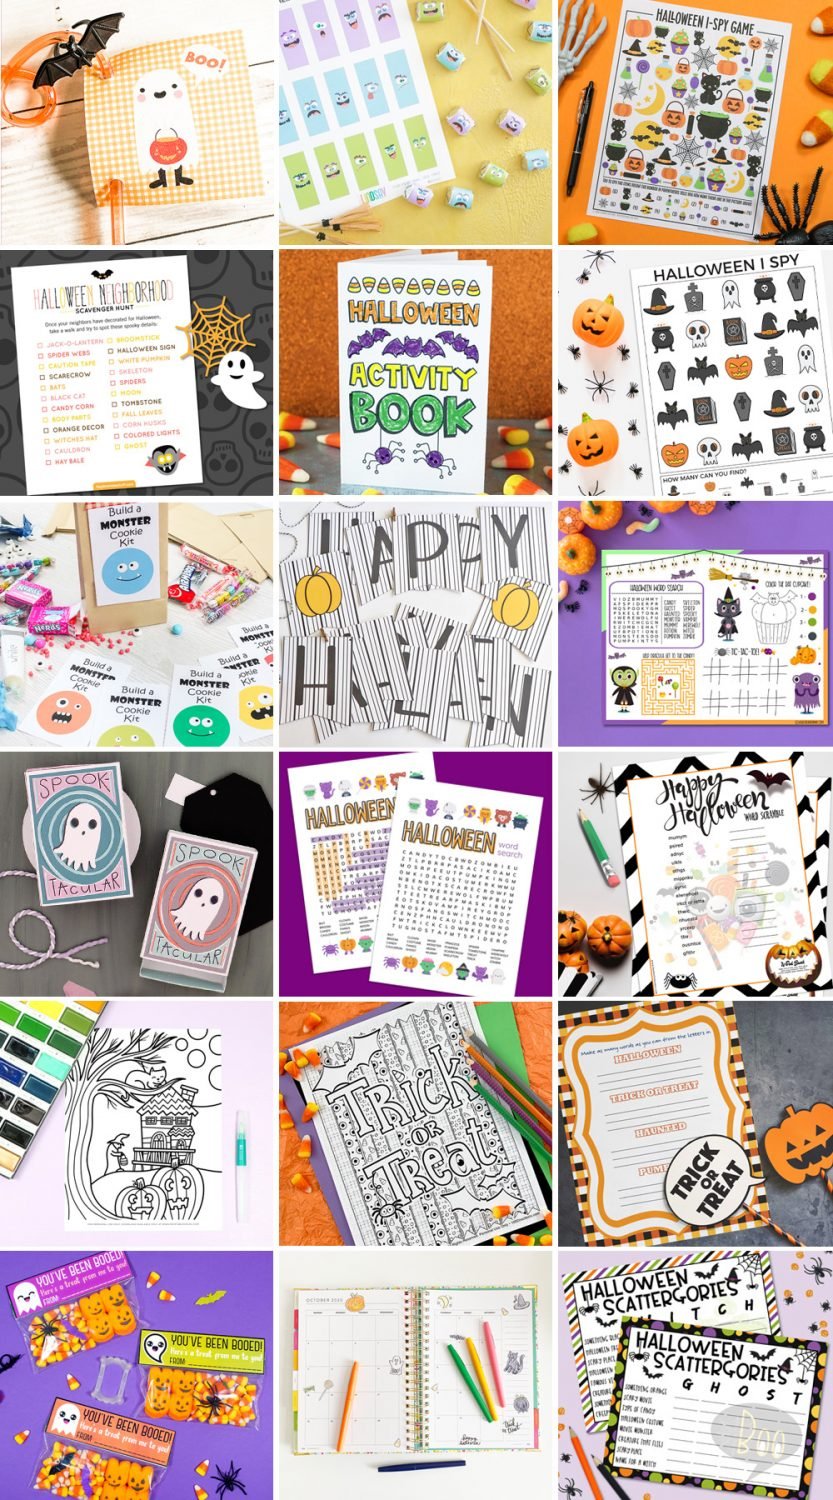 Collage of 18 Halloween printable activities from printable ghost tags, candy wrappers, banner, placemat, stickers and other fun games.